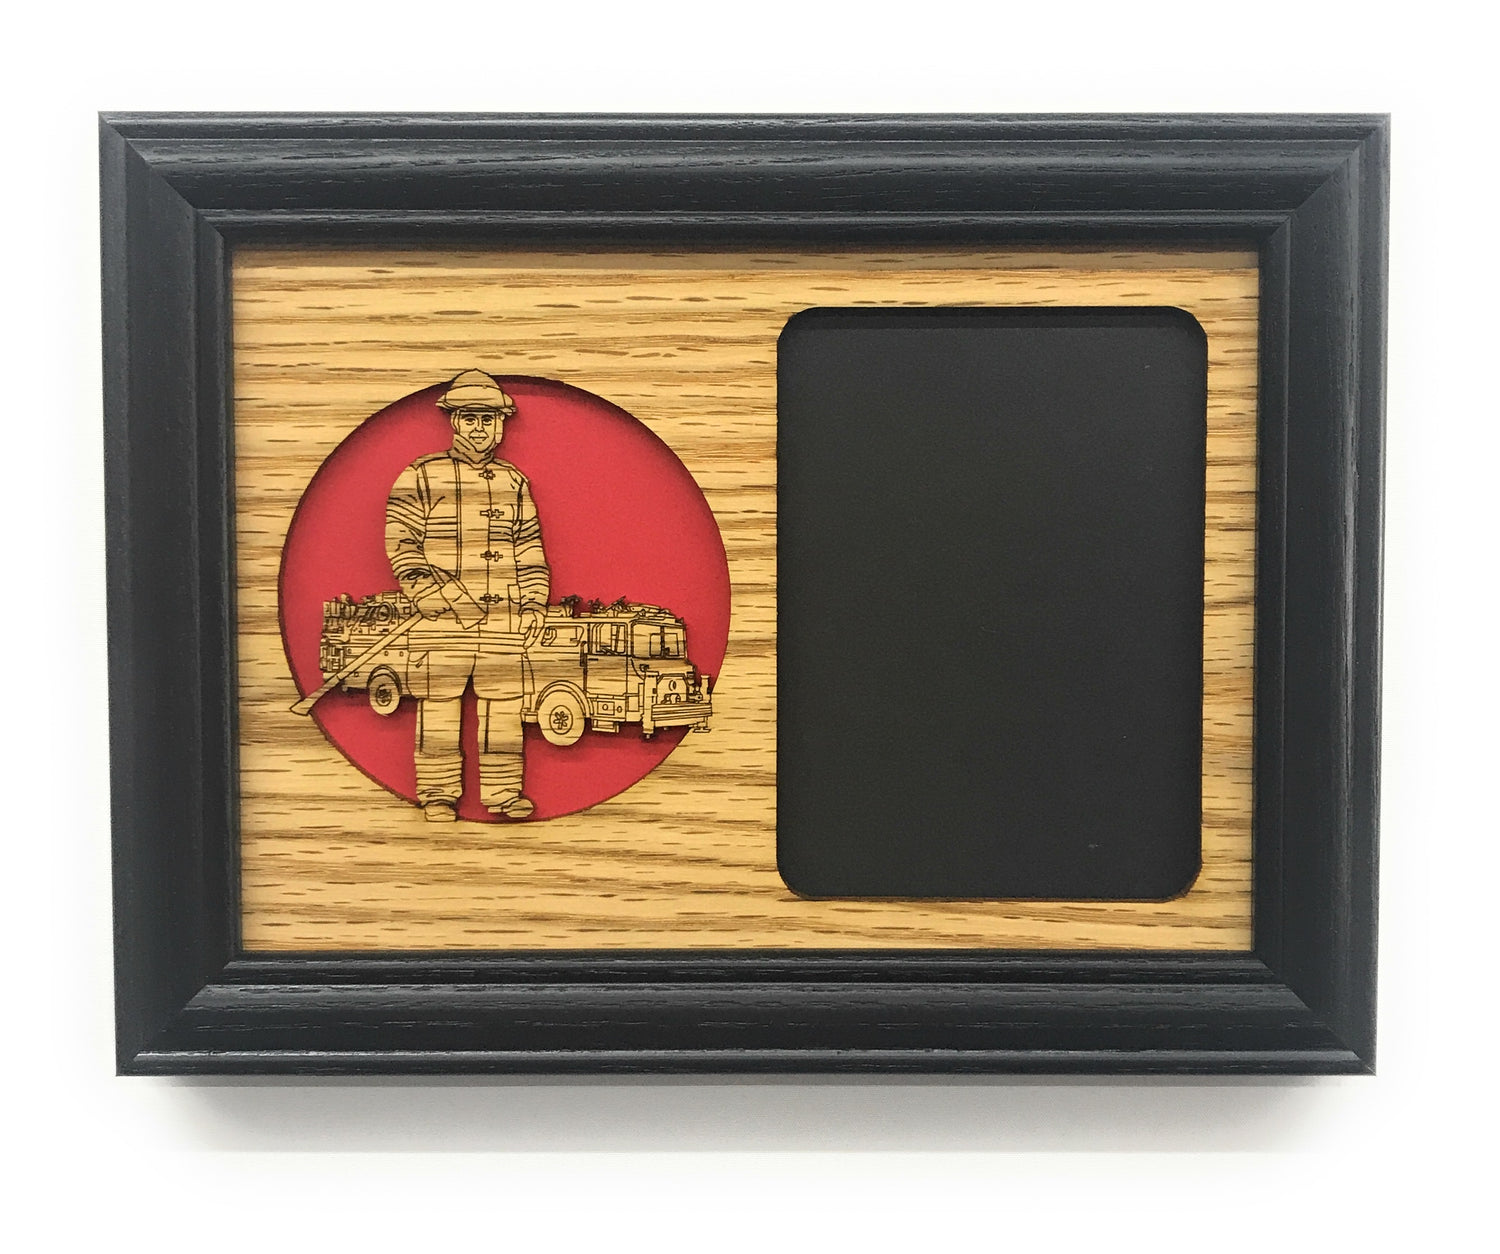 Occupation Frames & Gifts